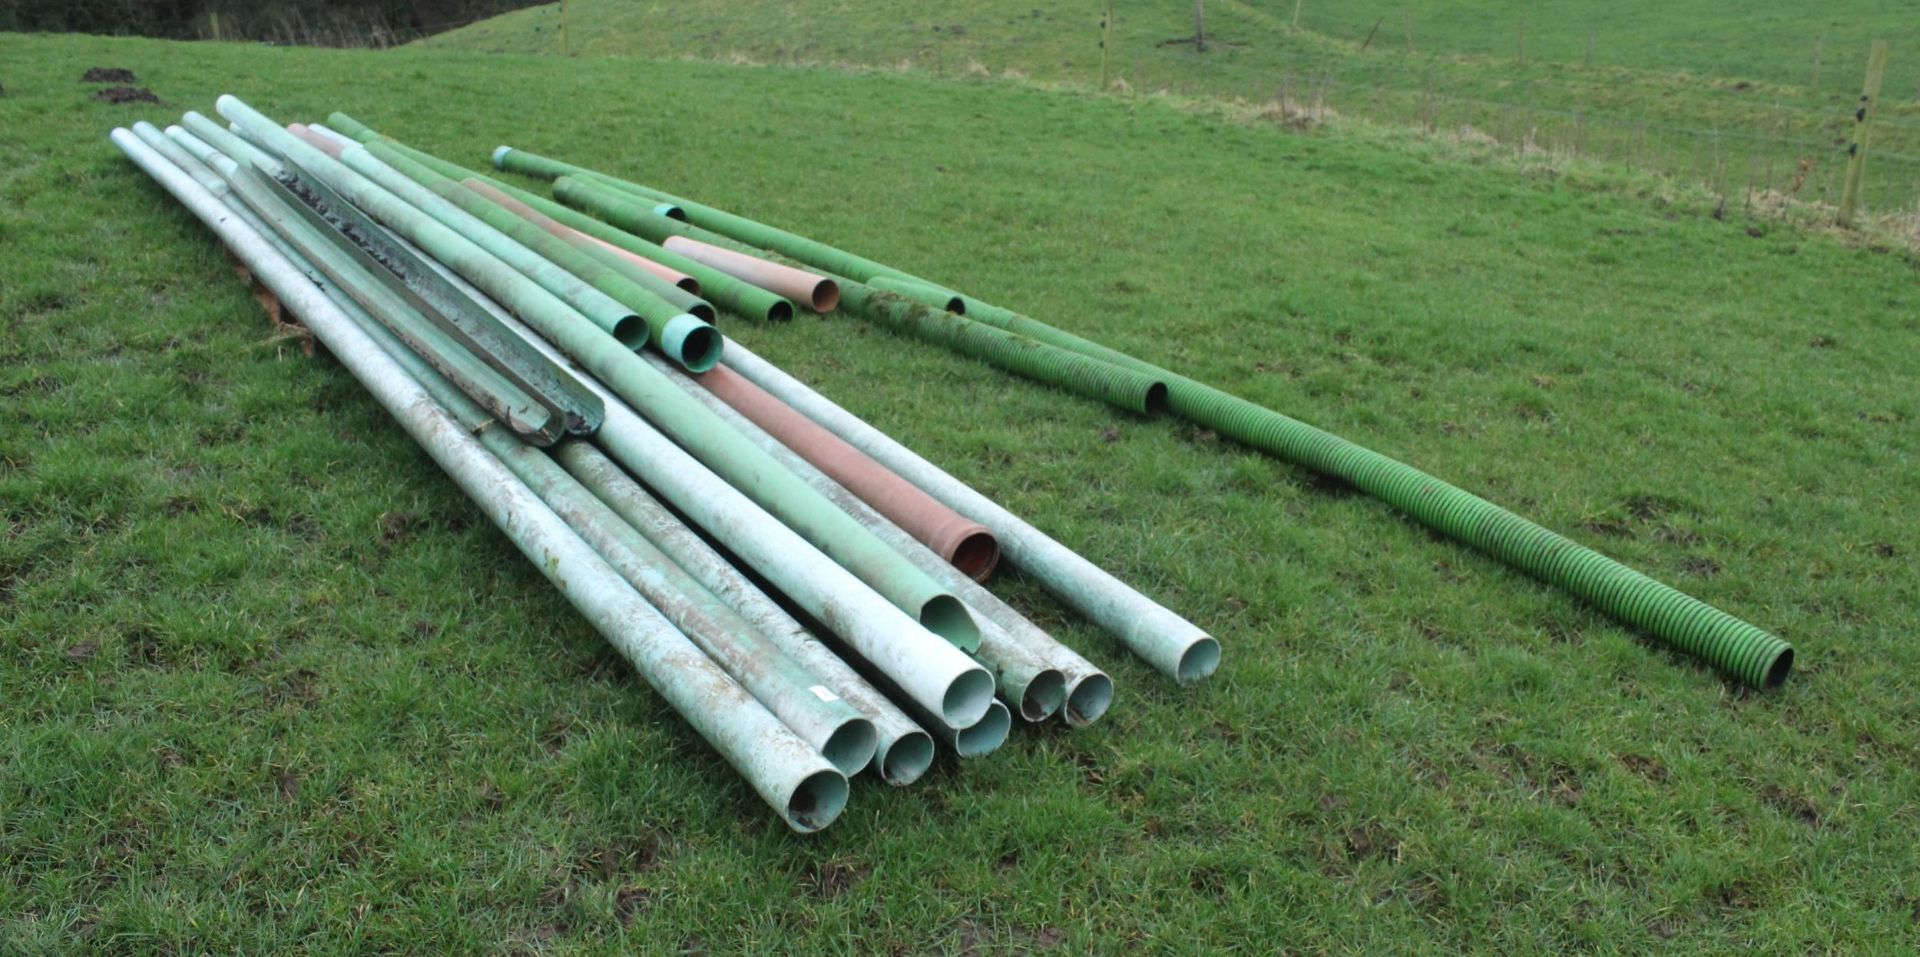 16 DUCTING PIPES 19'9" LONG + VAT